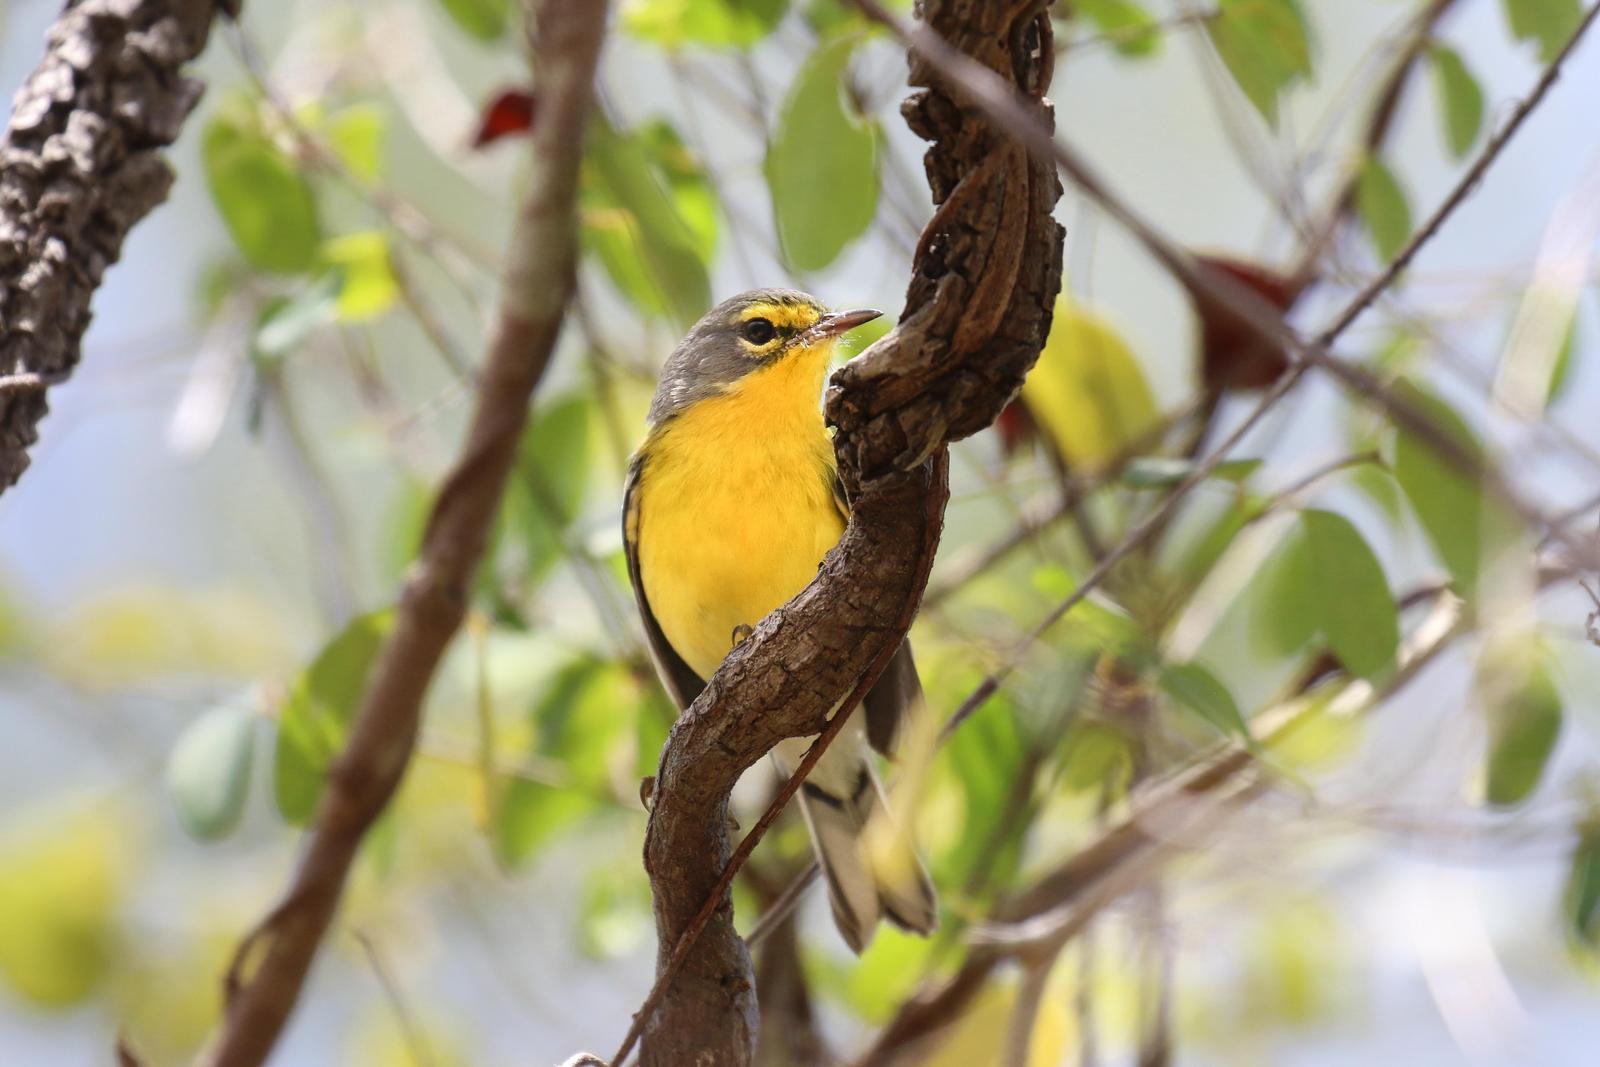 Adelaide's Warbler Photo by Tom Ford-Hutchinson